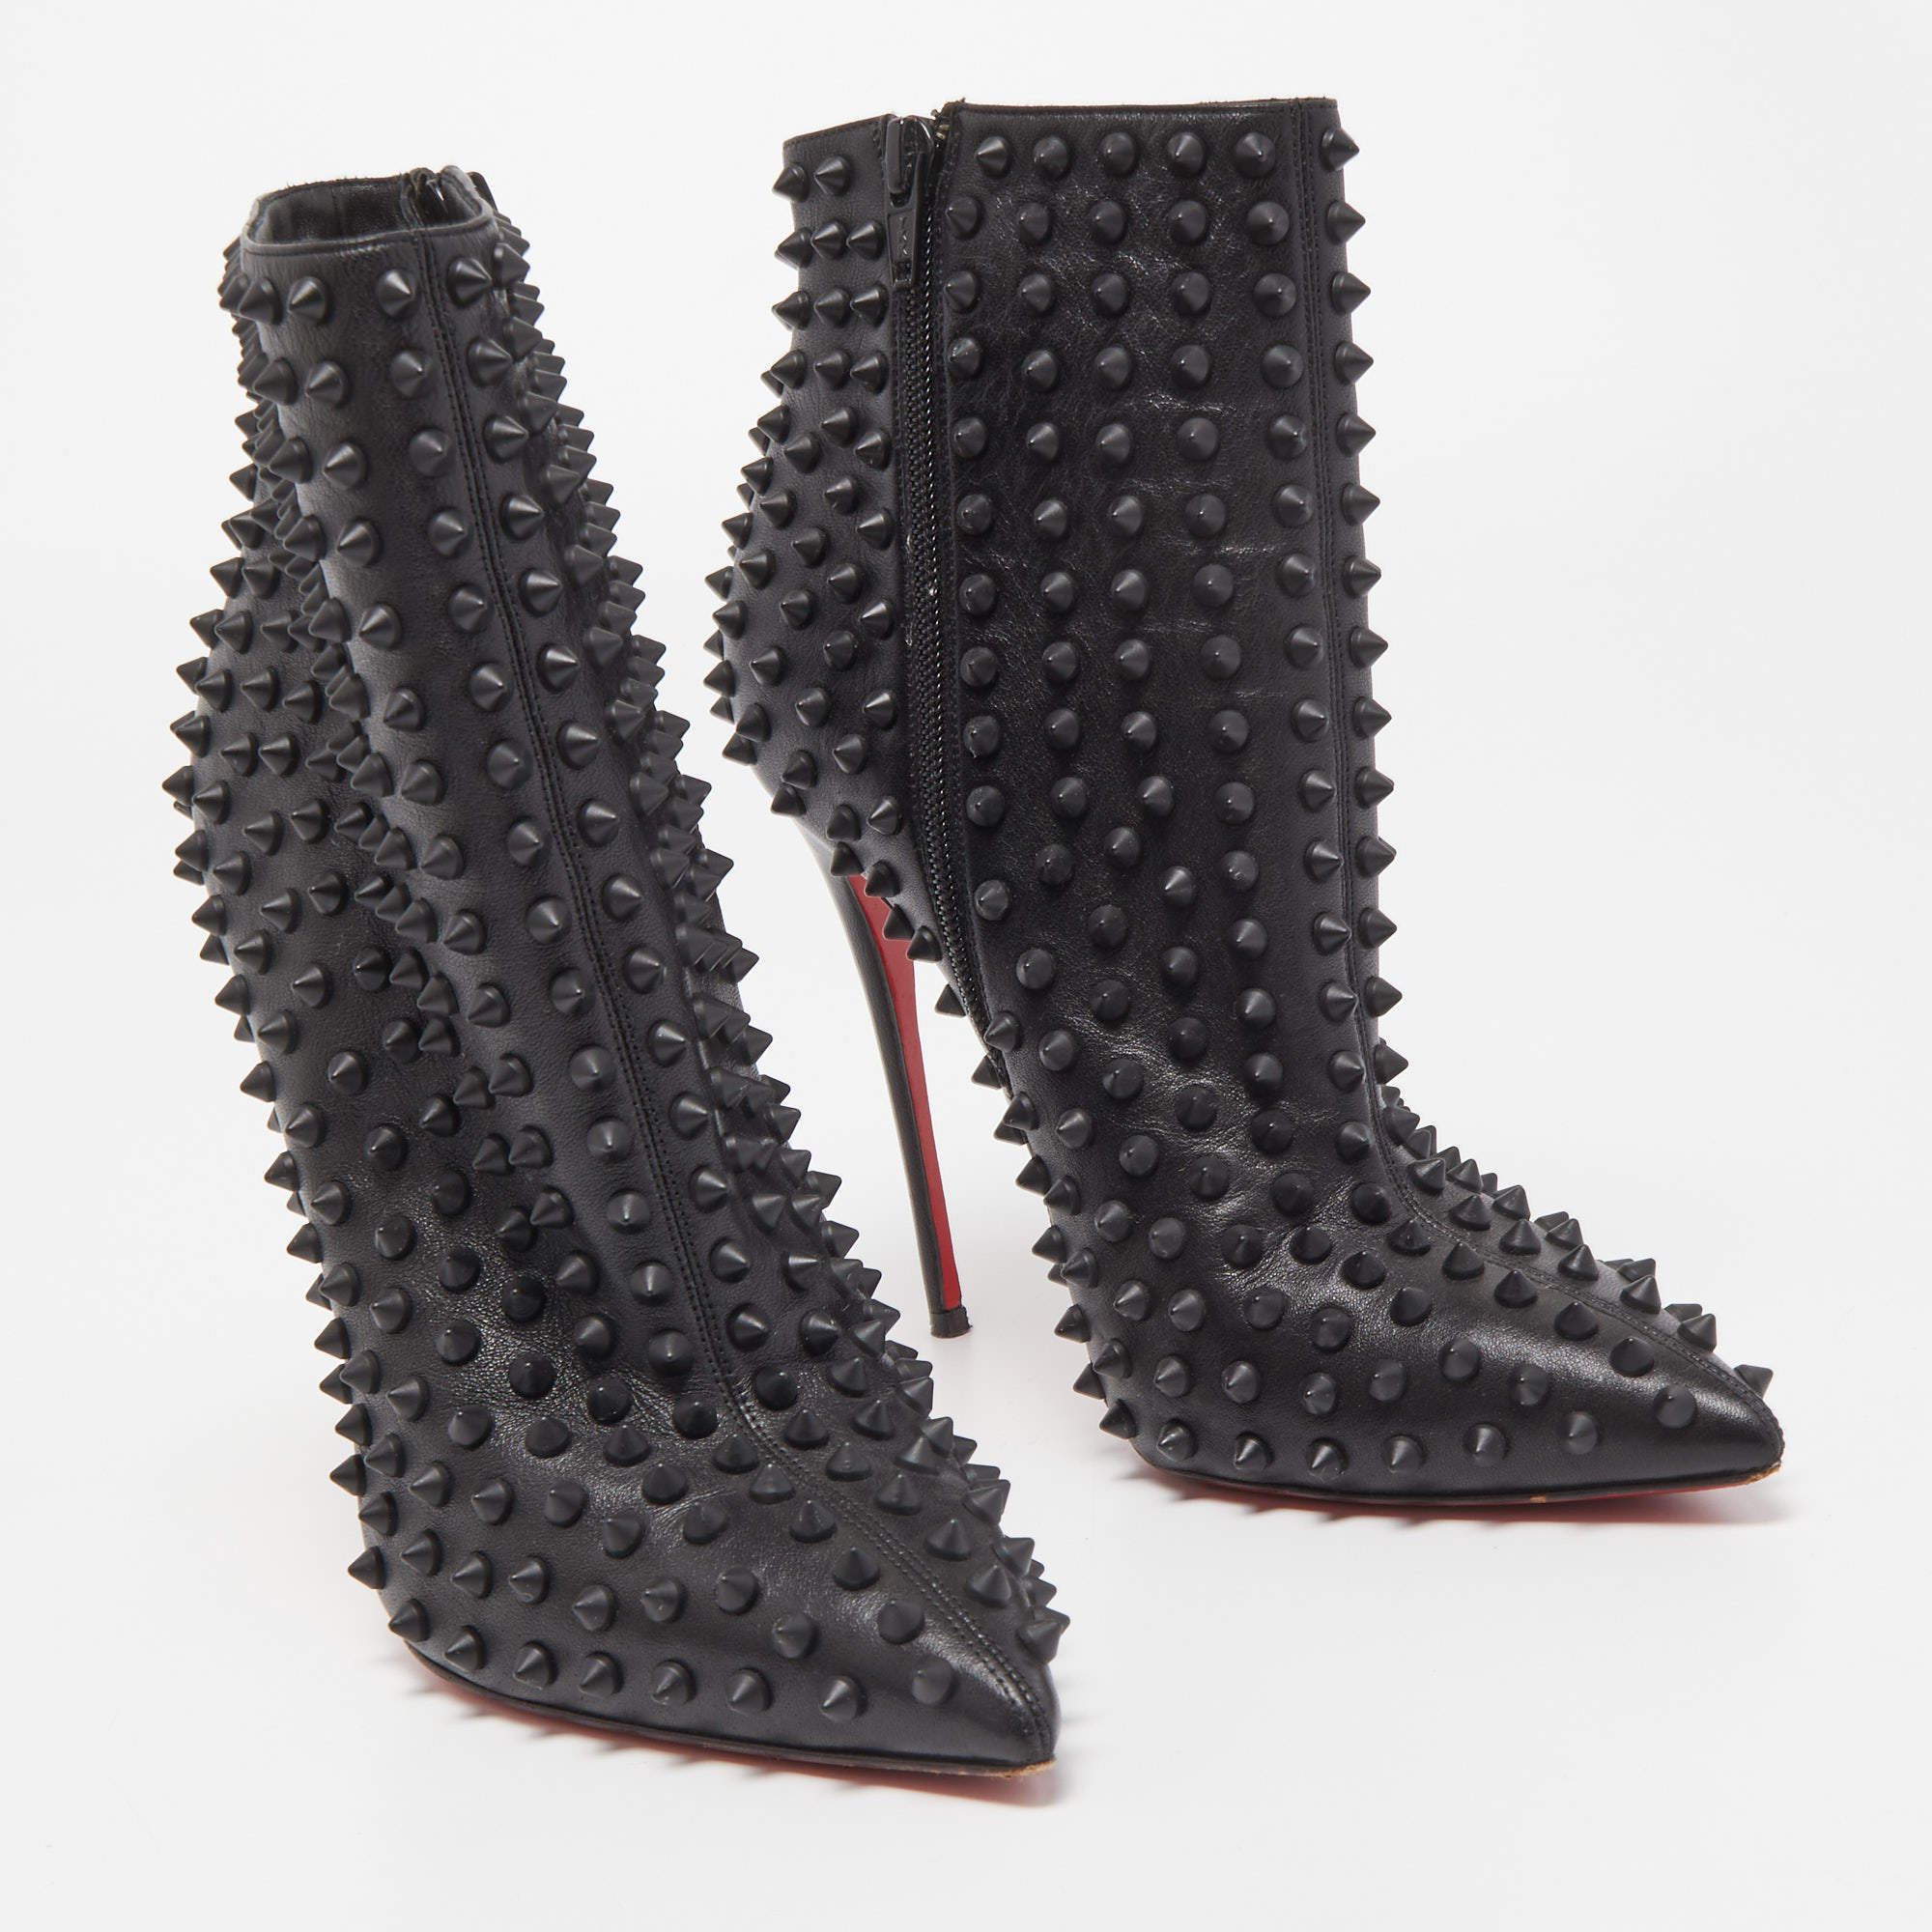 CHRISTIAN LOUBOUTIN Snakilta Corazon Red Spike Leather Ankle Boots  Booties 36